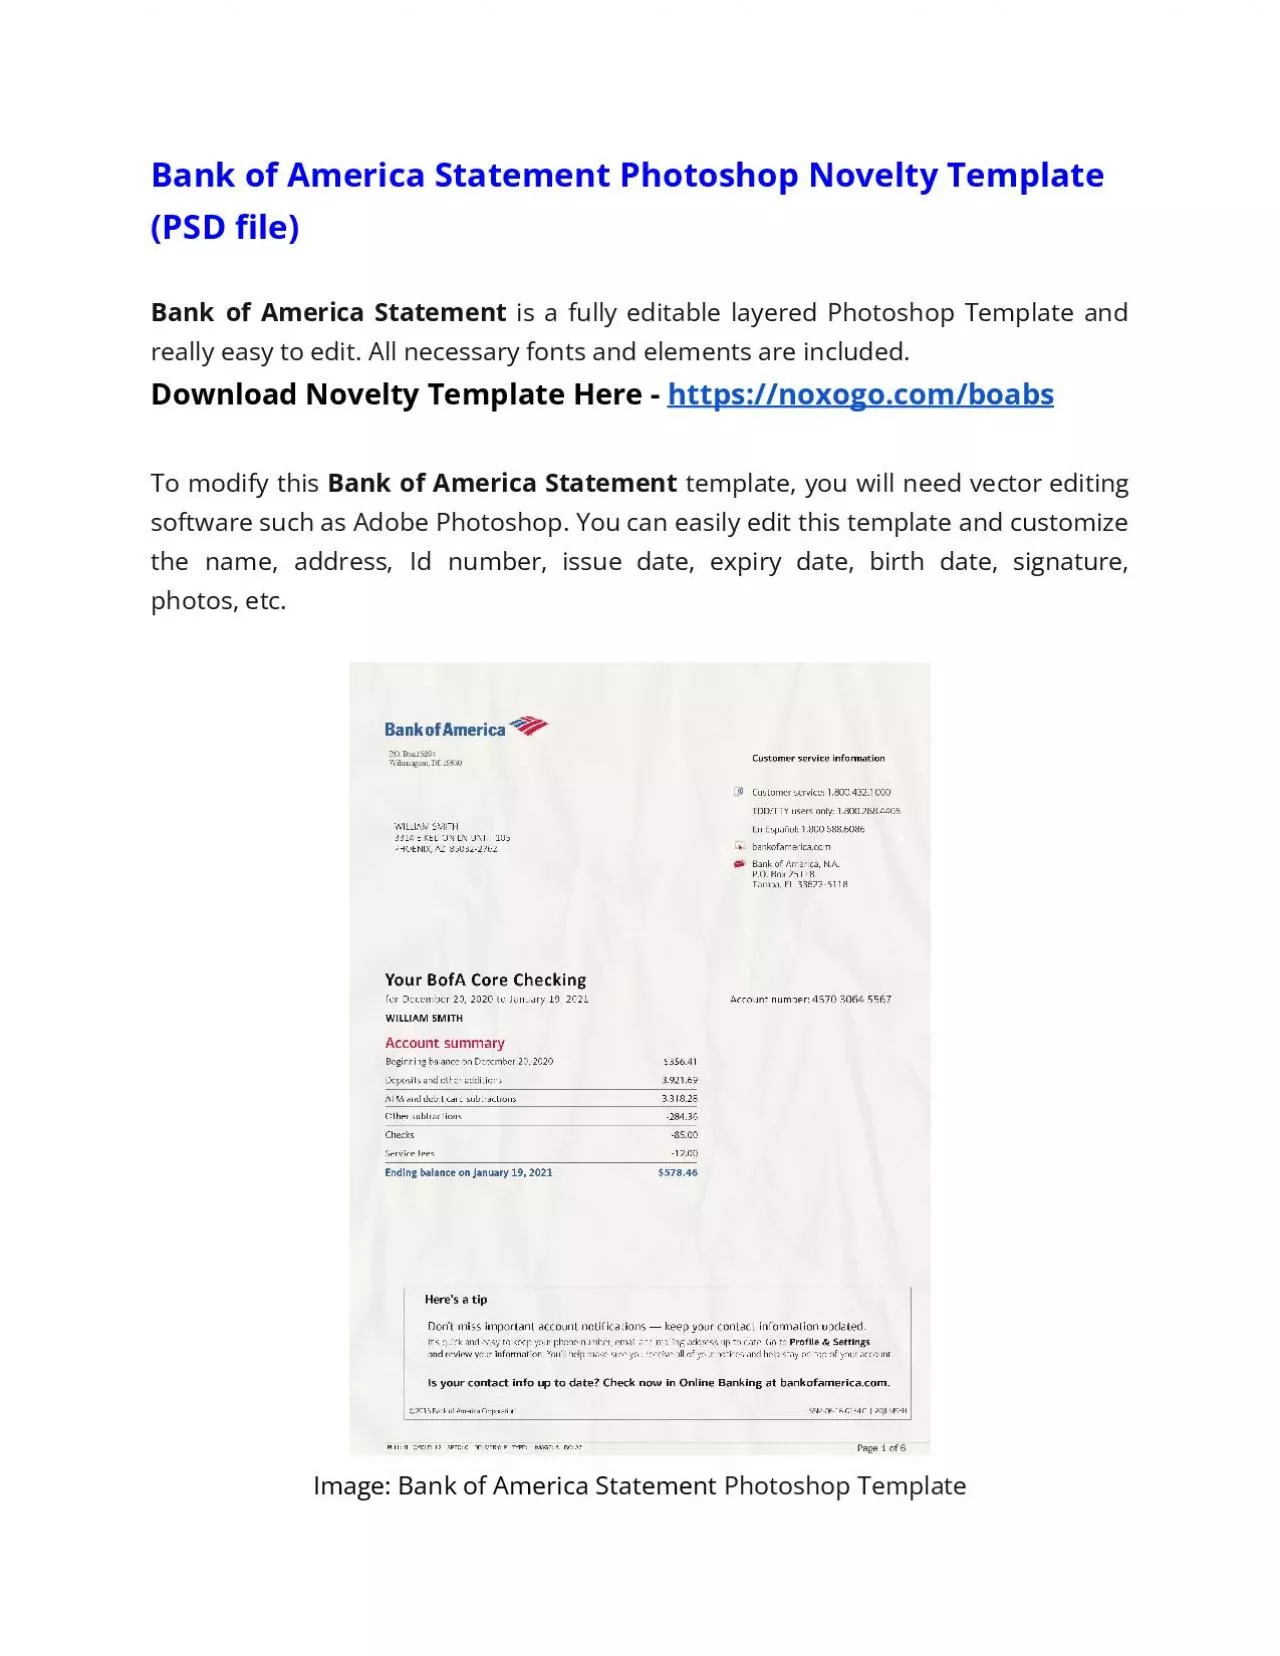 Bank of America Statement Photoshop Novelty Template